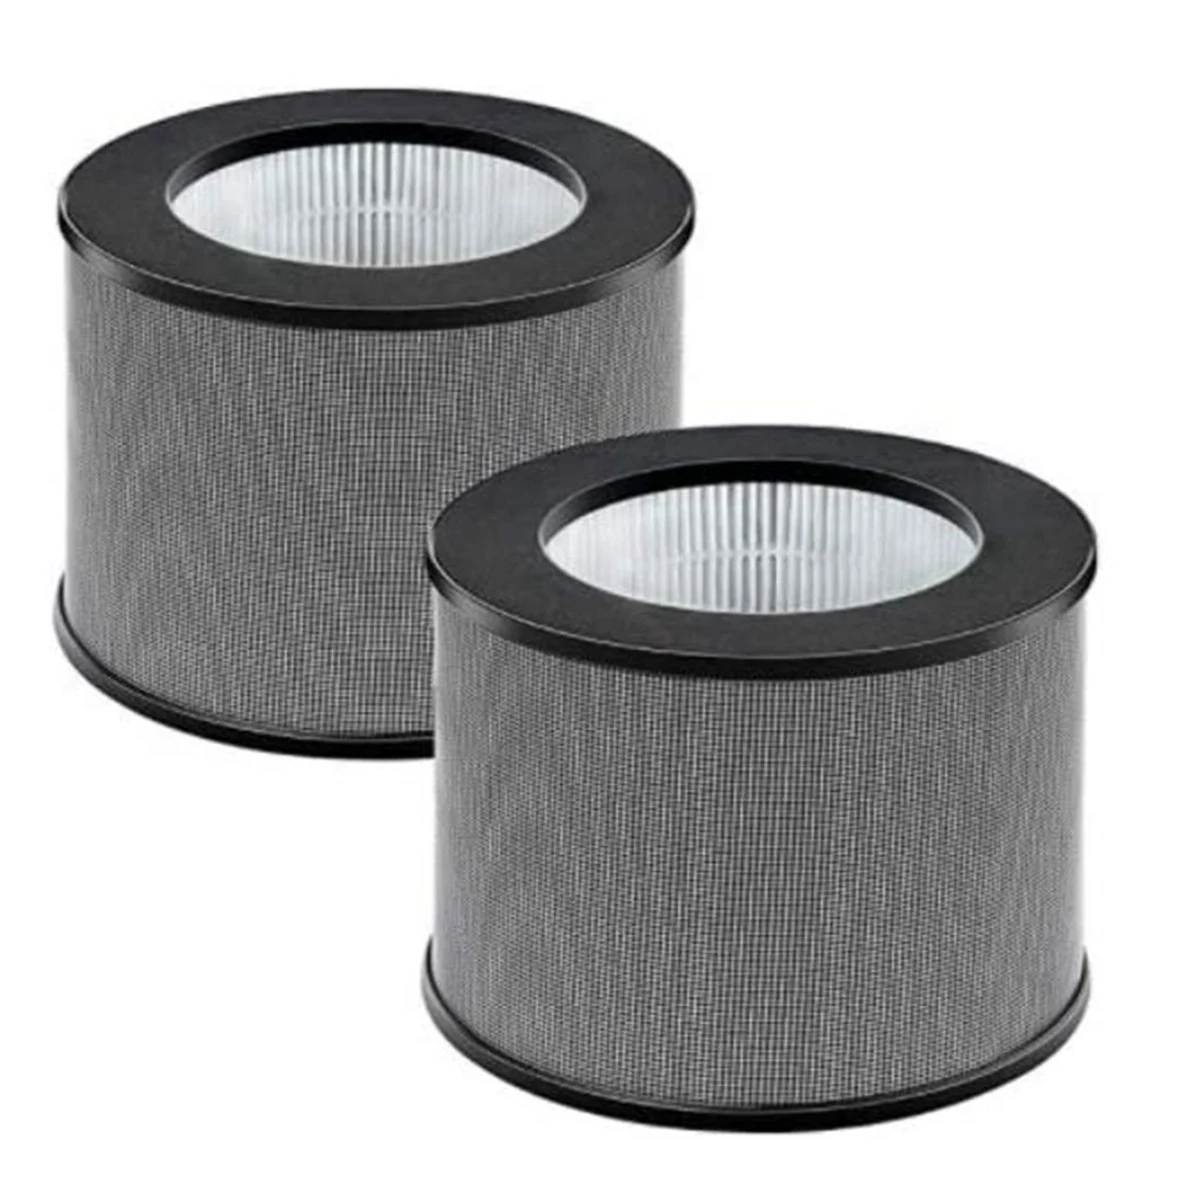 

2 Pack Replacement Filter for TaoTronics TT-AP006 Air Purifier, 3-In-1 H13 True HEPA Filter and Activated Carbon Filter